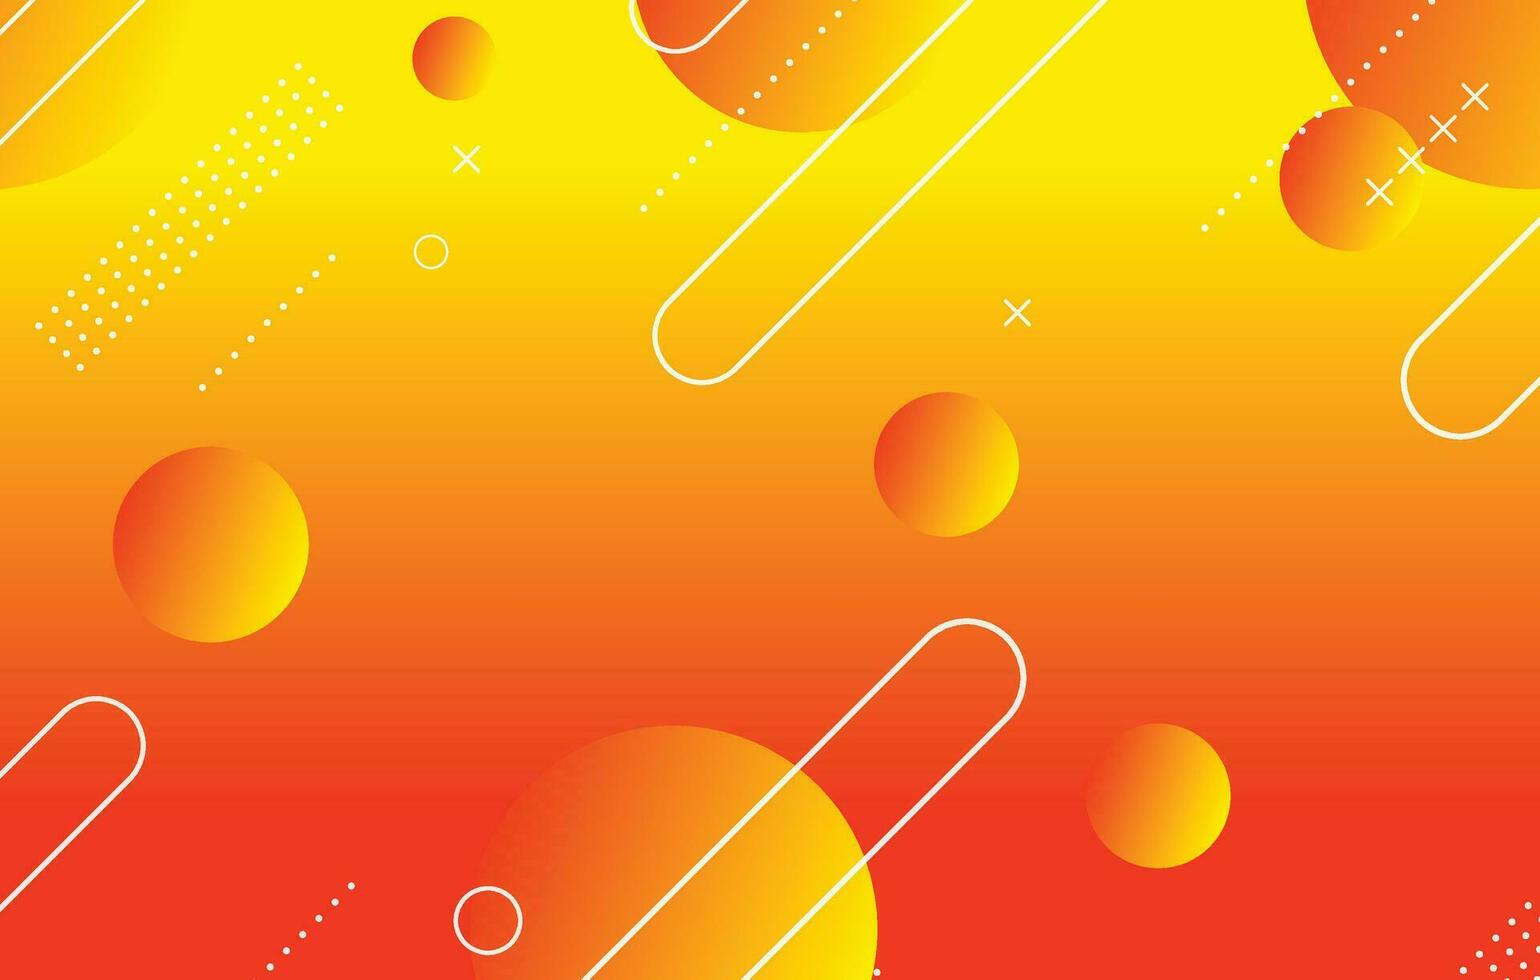 Abstract colorful geometric background. Orange and yellow elements with gradient vector